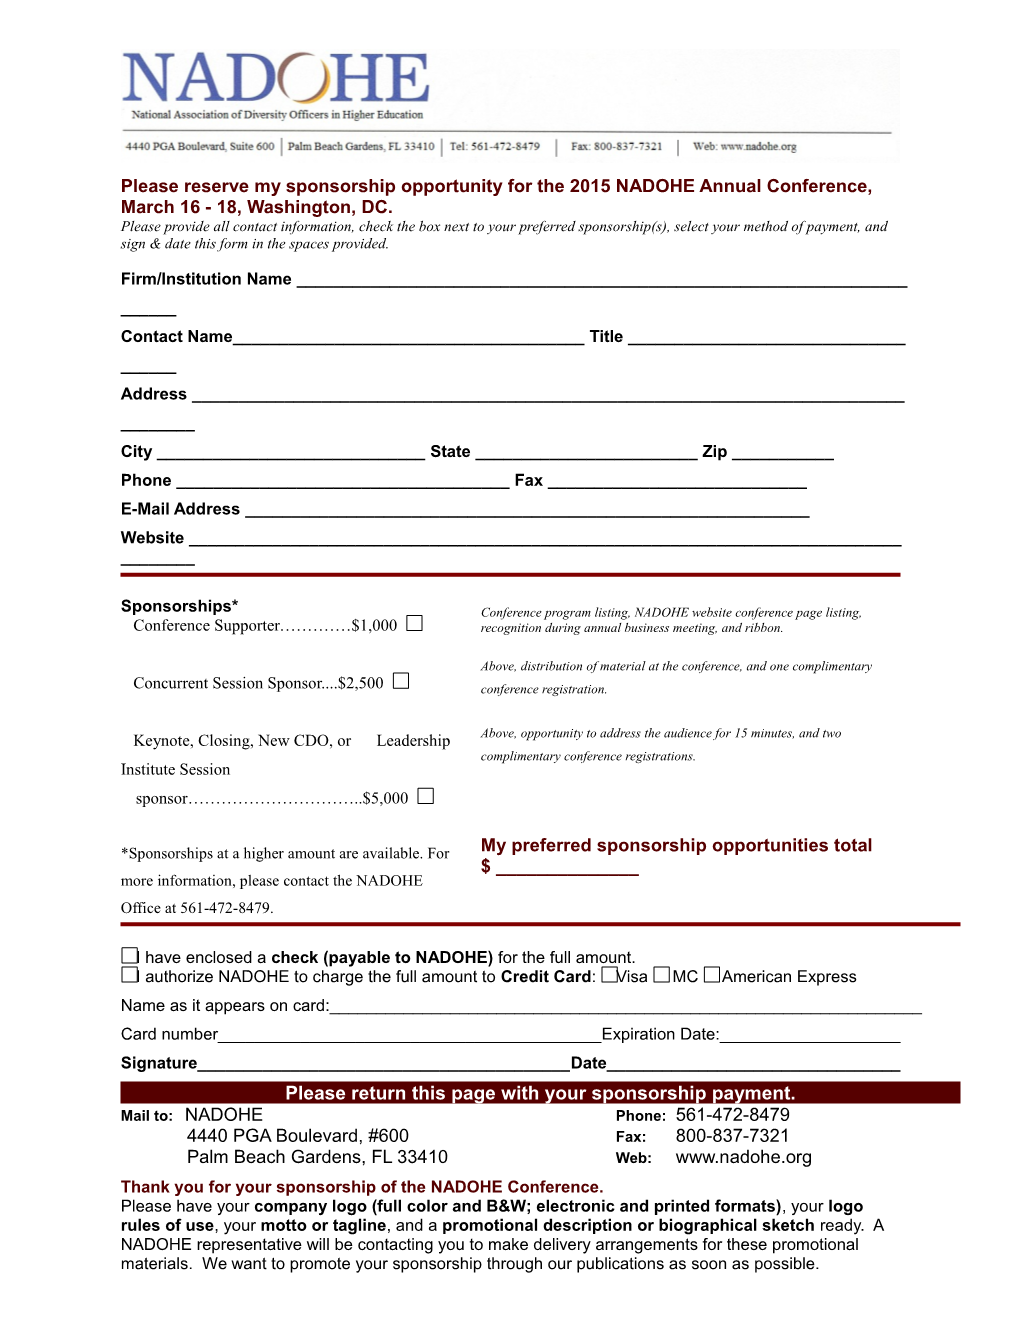 Please Reserve My Sponsorship Opportunity Forthe 2015NADOHE Annual Conference, March 16